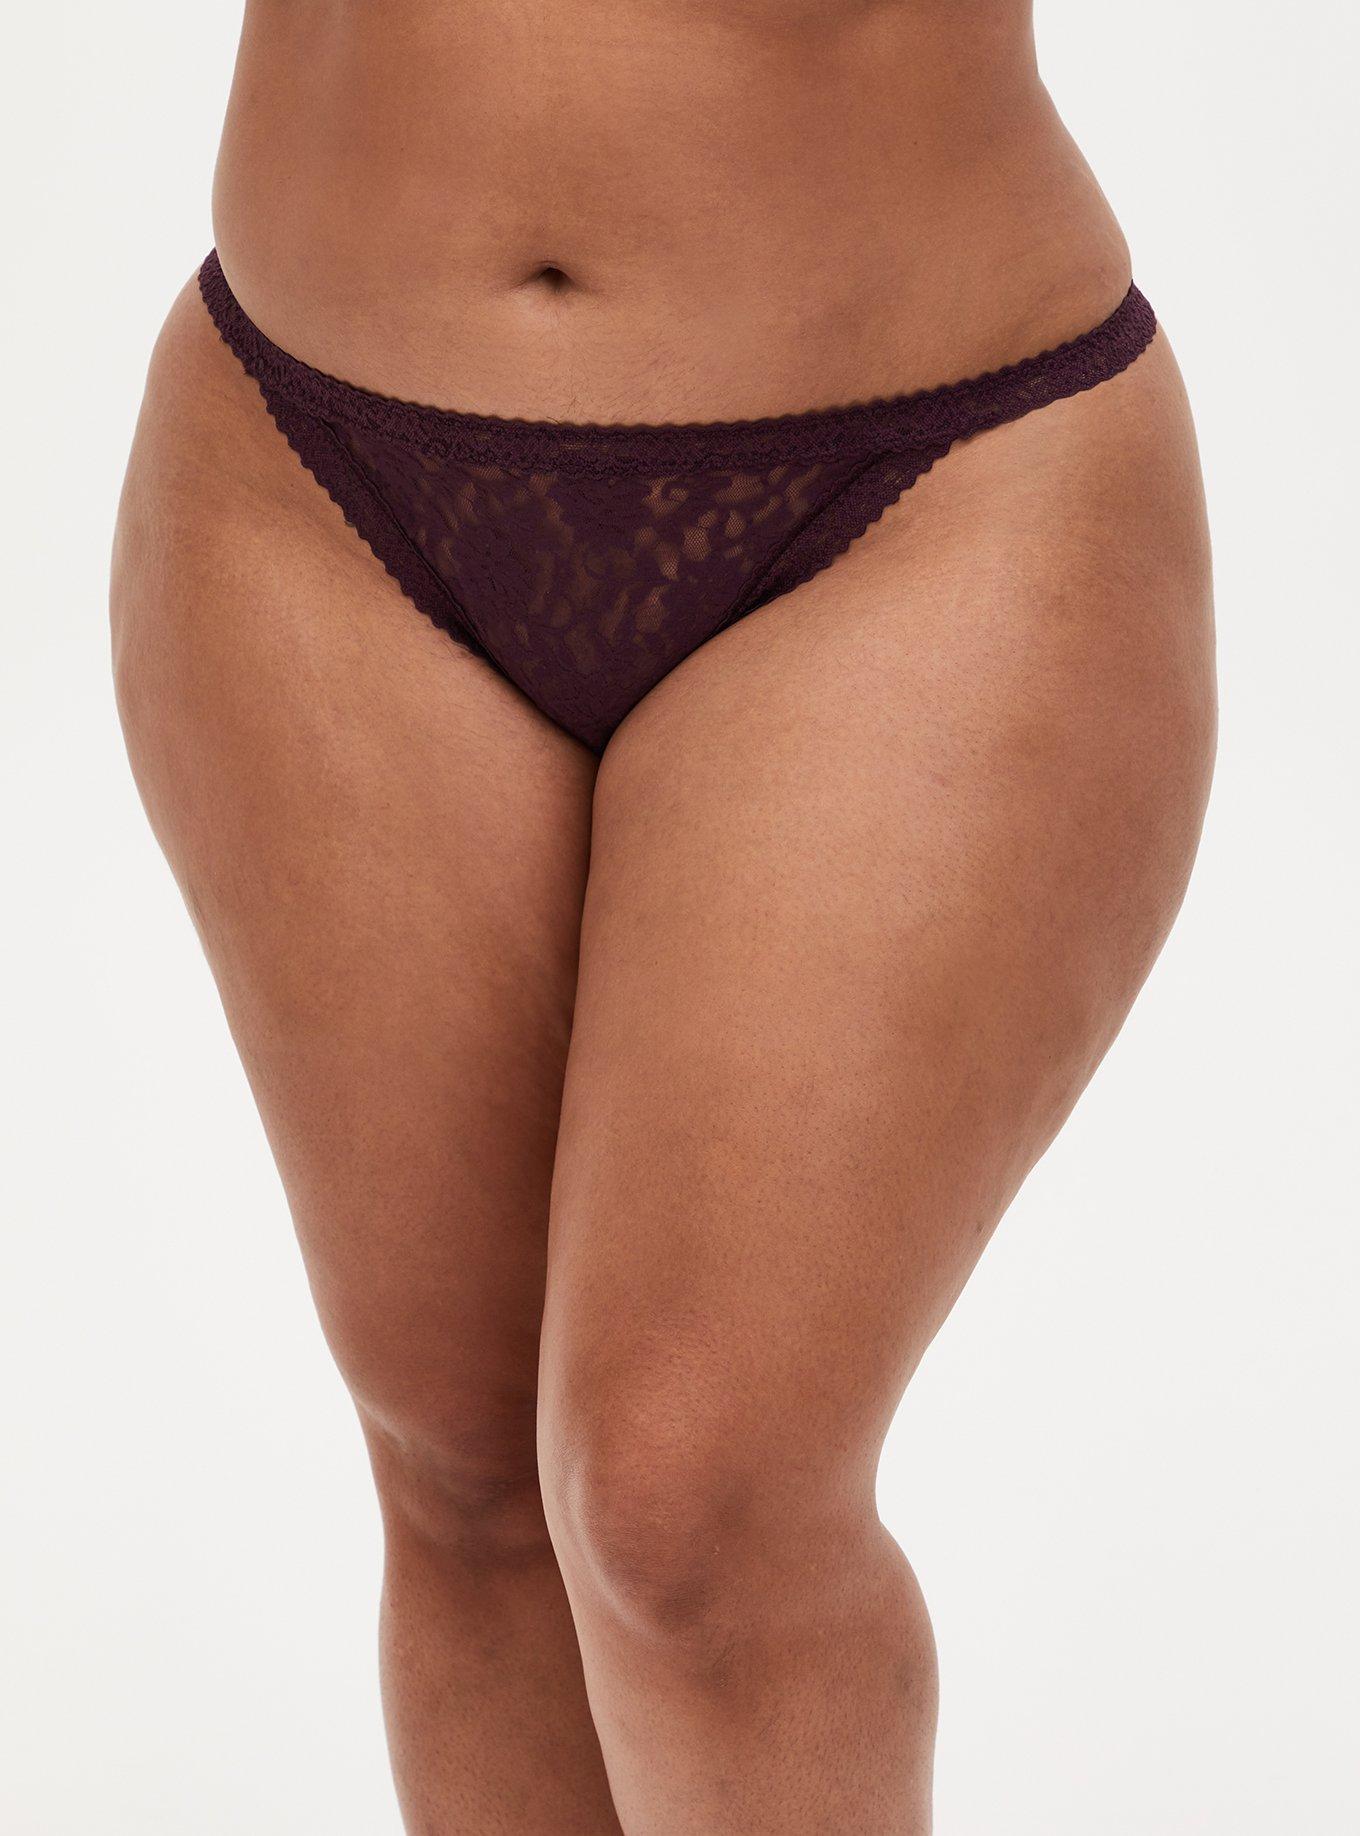 Ladies Panties Size 6 Womens Mid Waist Sexy Lace And Raise The